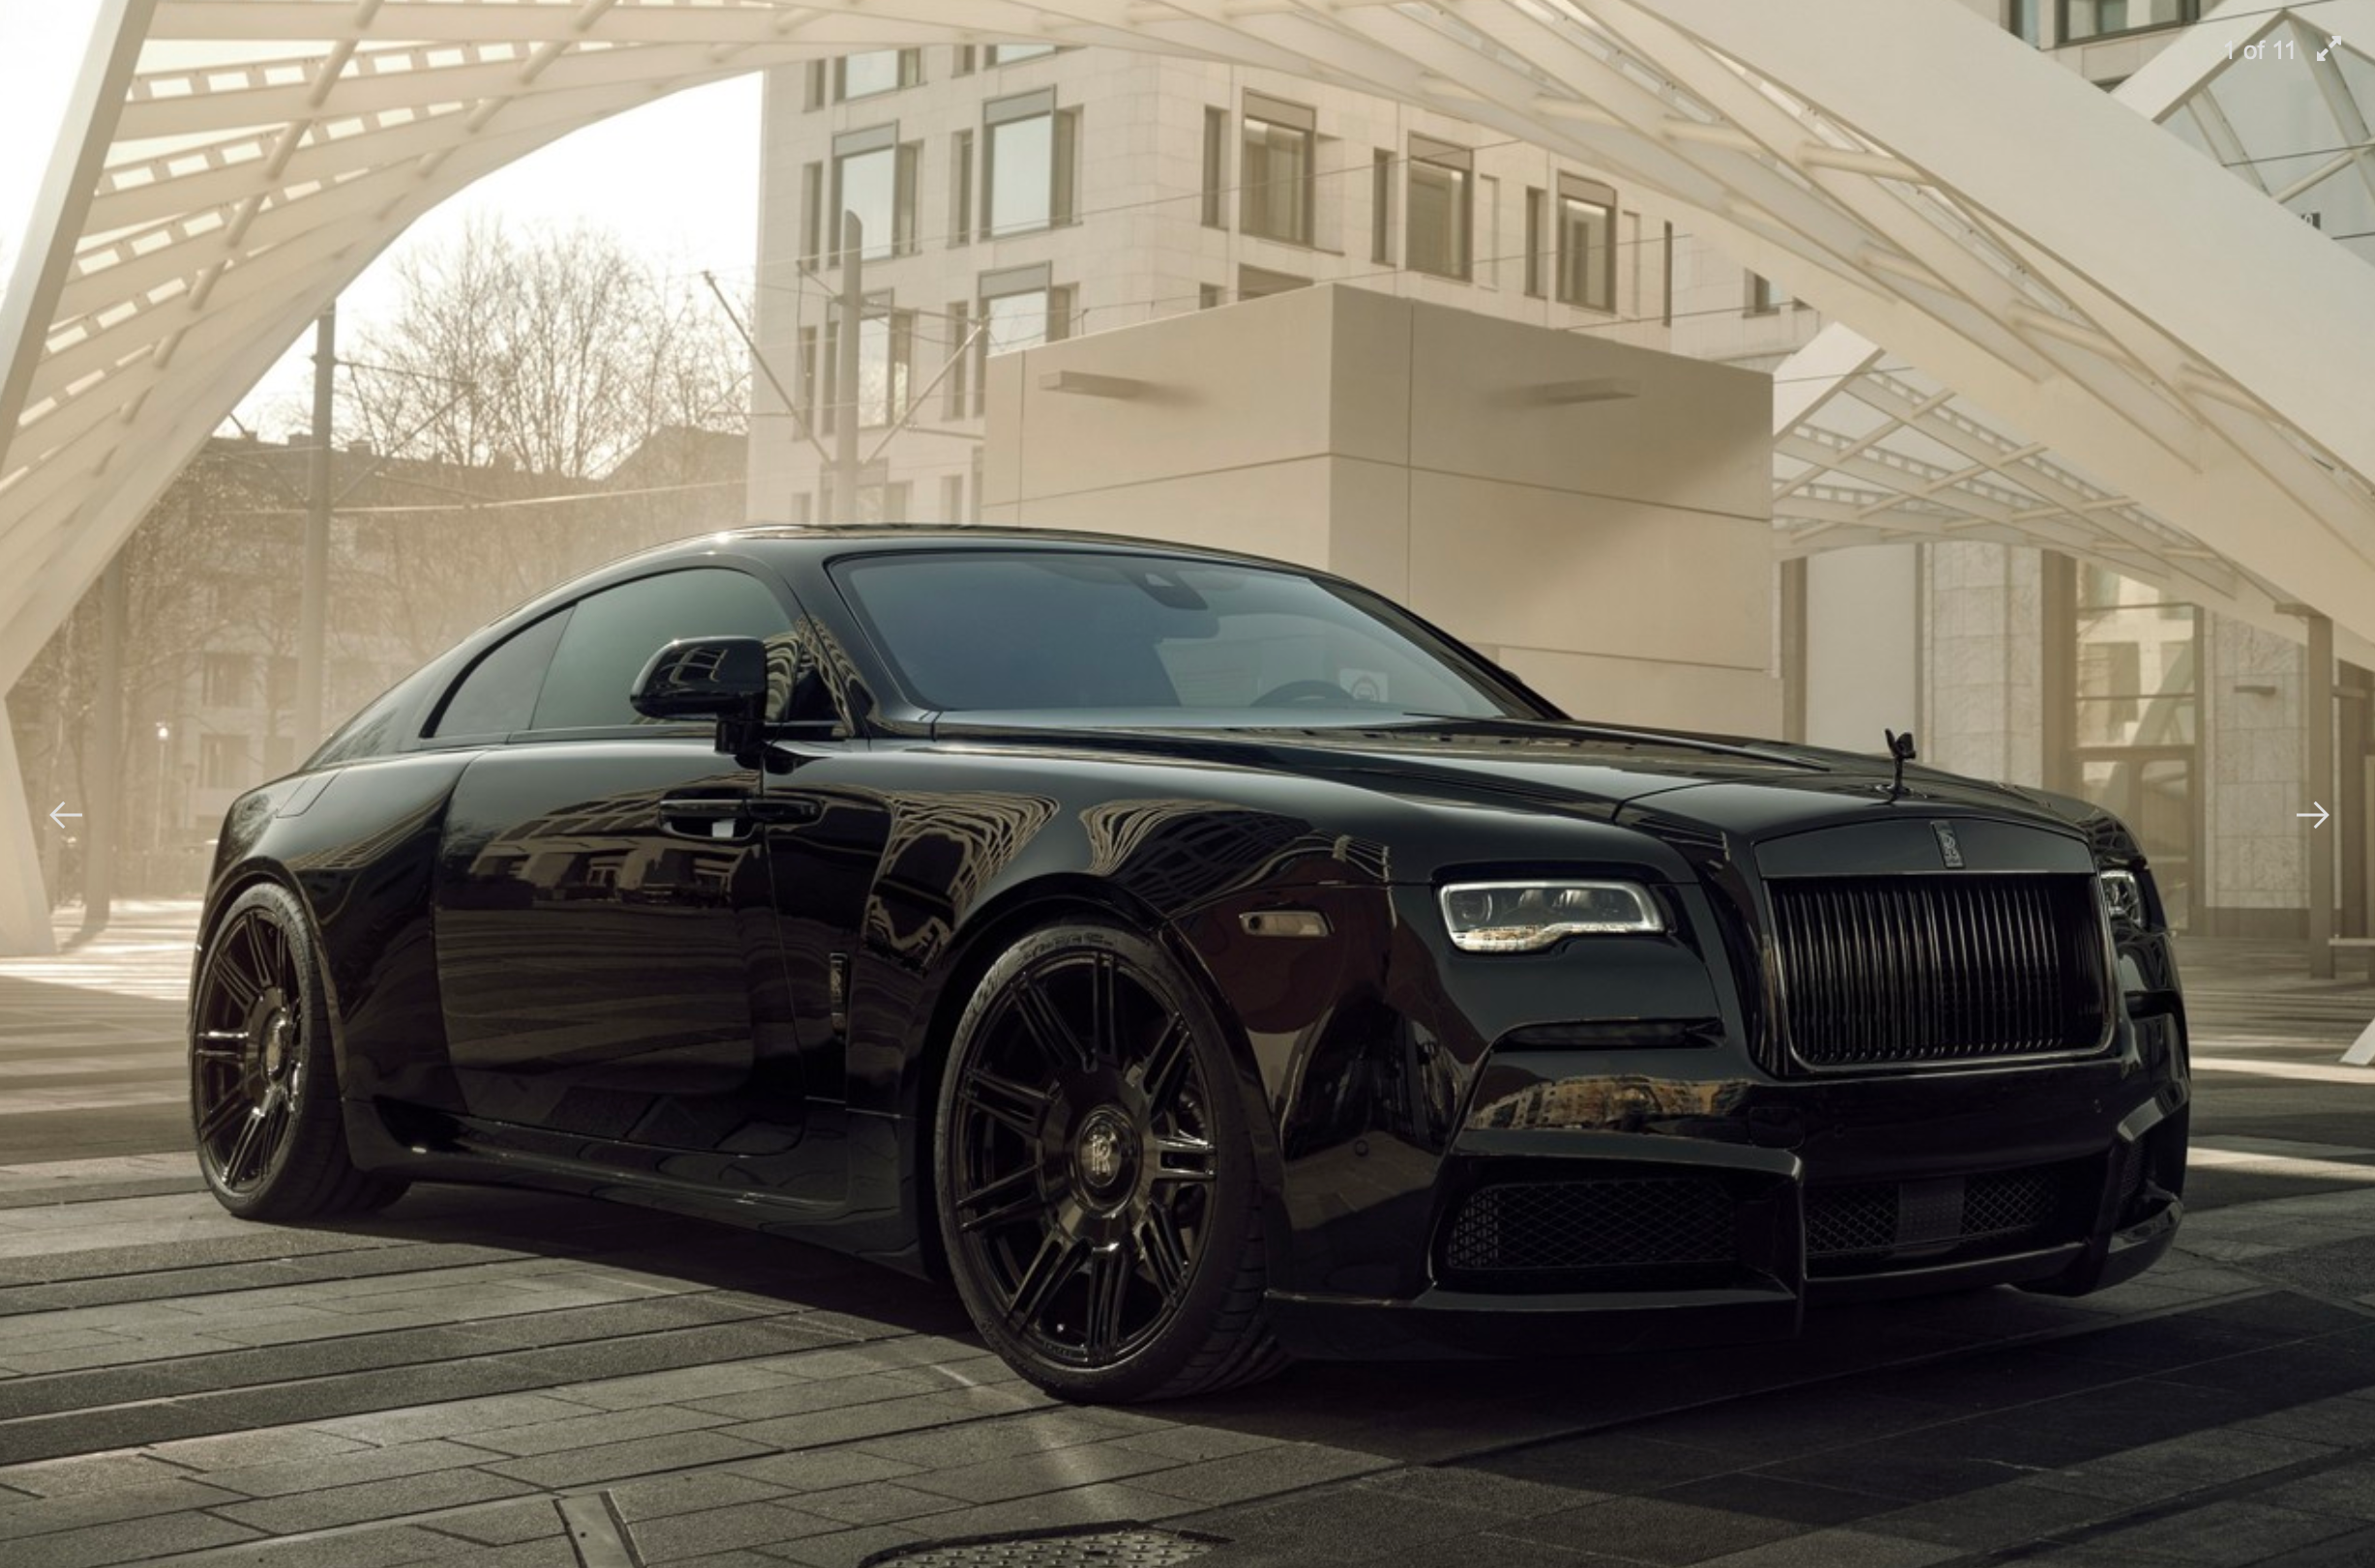 SPOFEC's Rolls-Royce Black Badge Wraith Is an "OVERDOSE" of Power and Presence